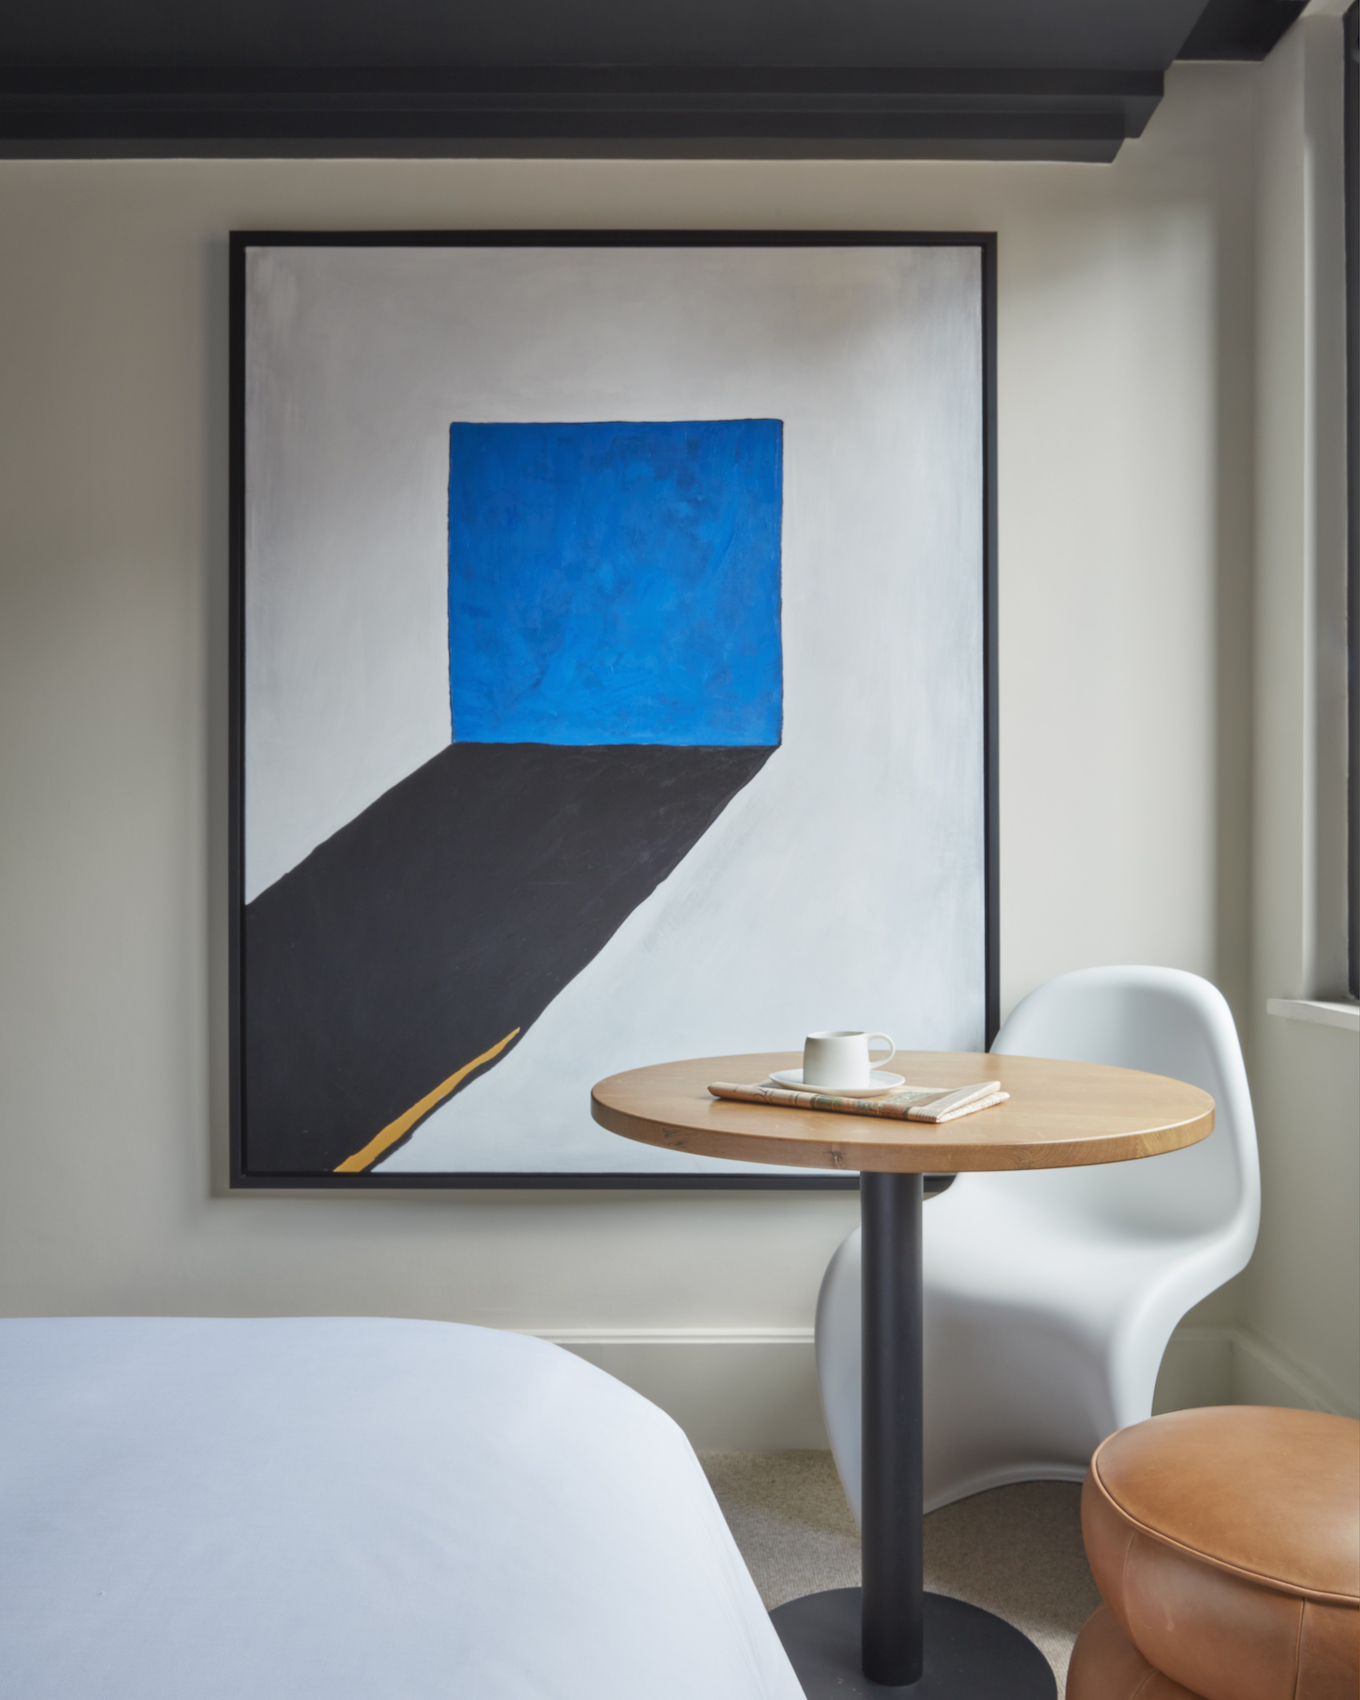 Suite at One Hundred Shoreditch in London, with Verner Panton chair and artwork by Jacu Strauss - Effect Magazine